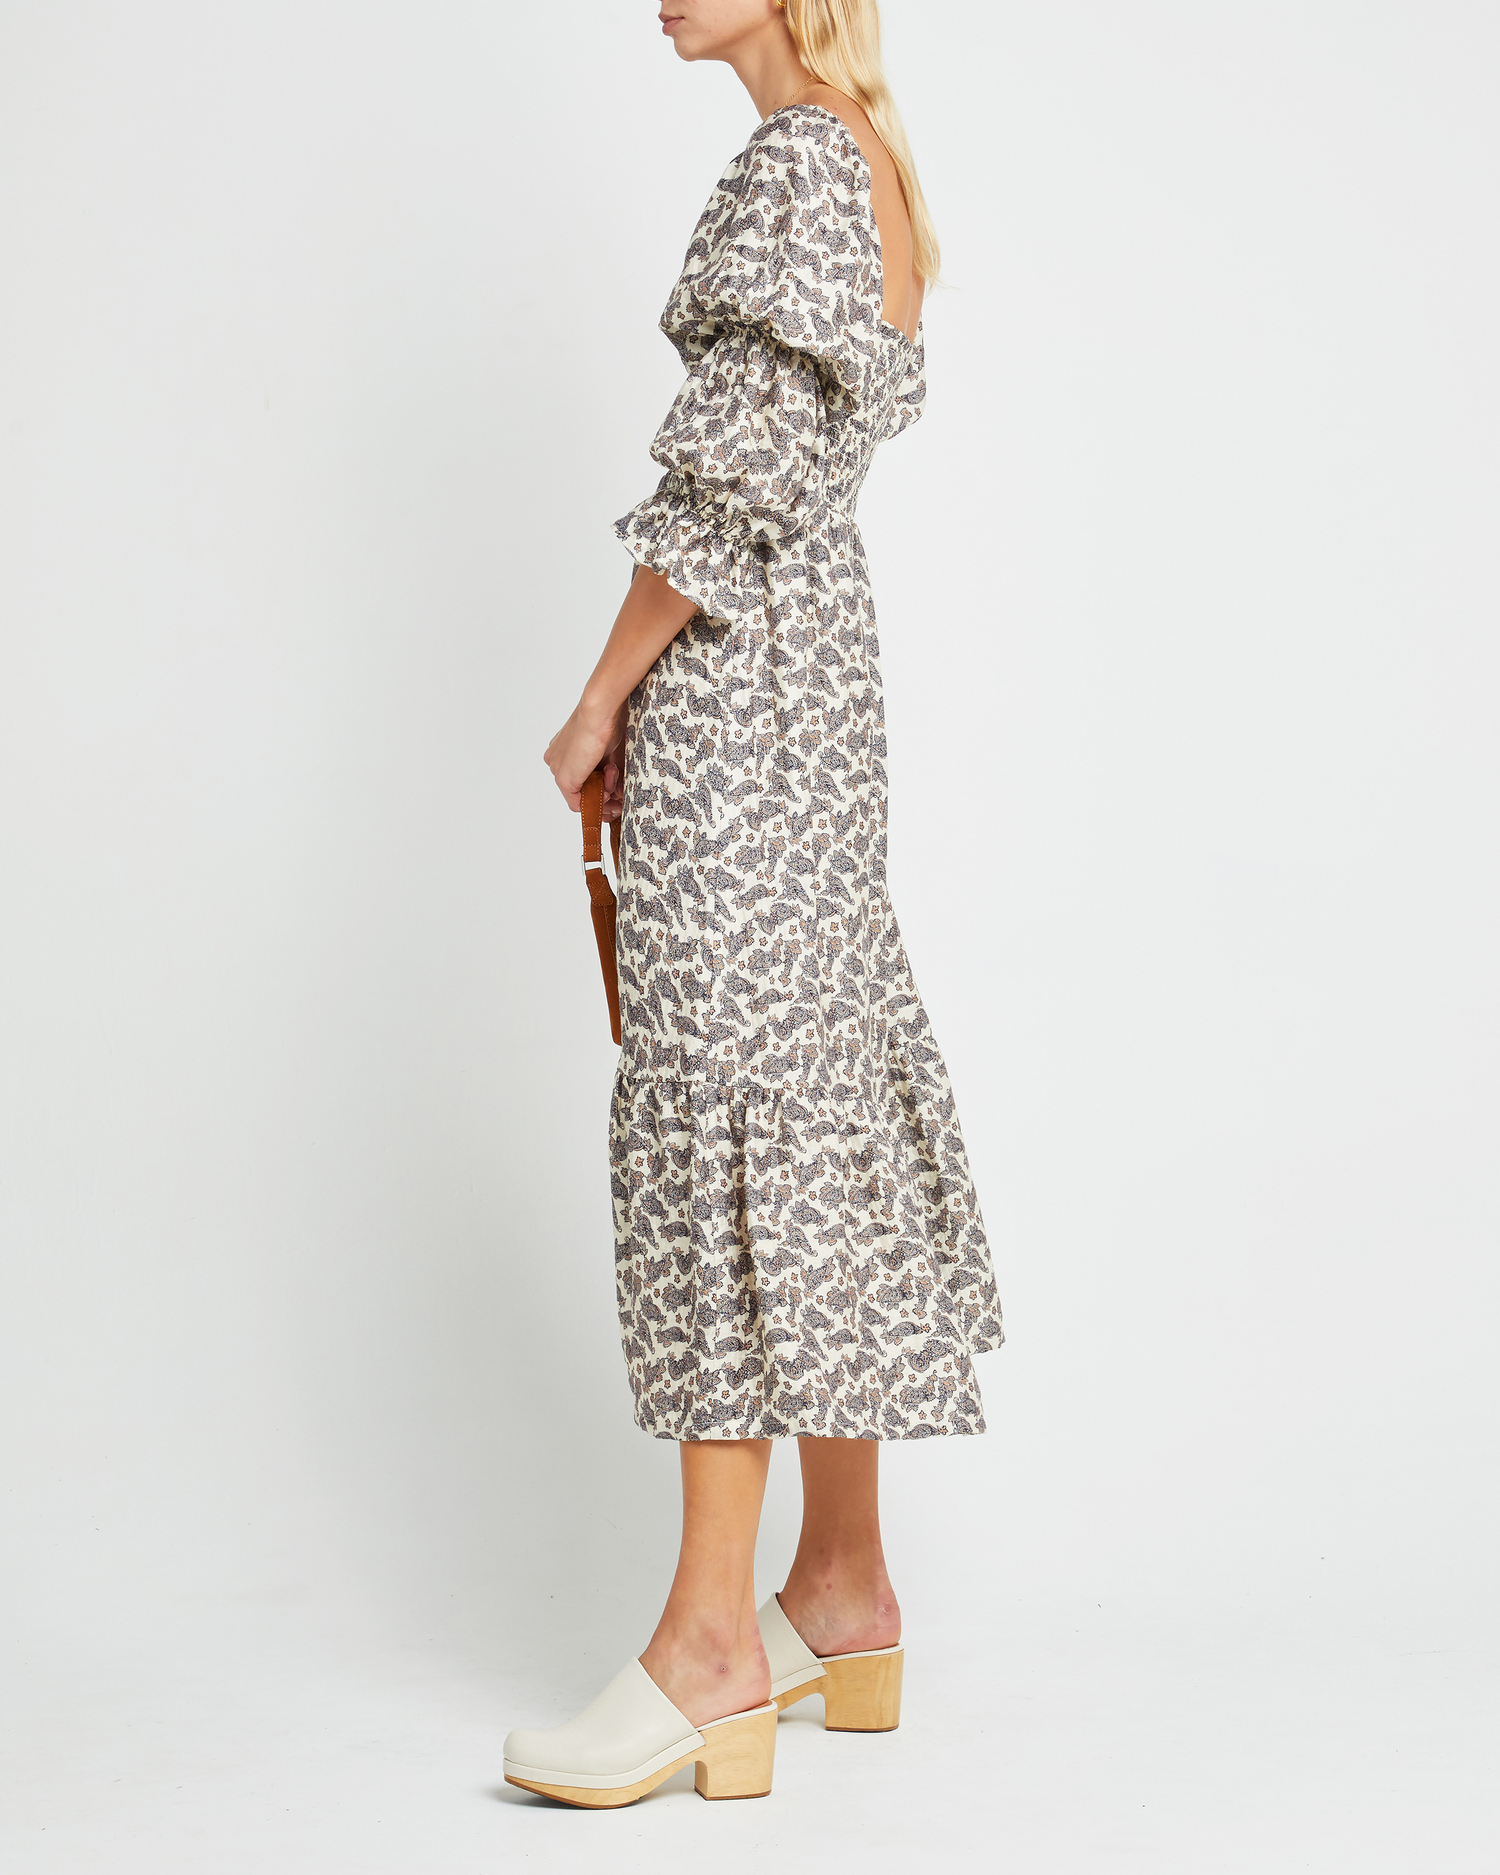 Third image of Brigitte Dress, a floral maxi dress, puff sleeves, square neck, smocked